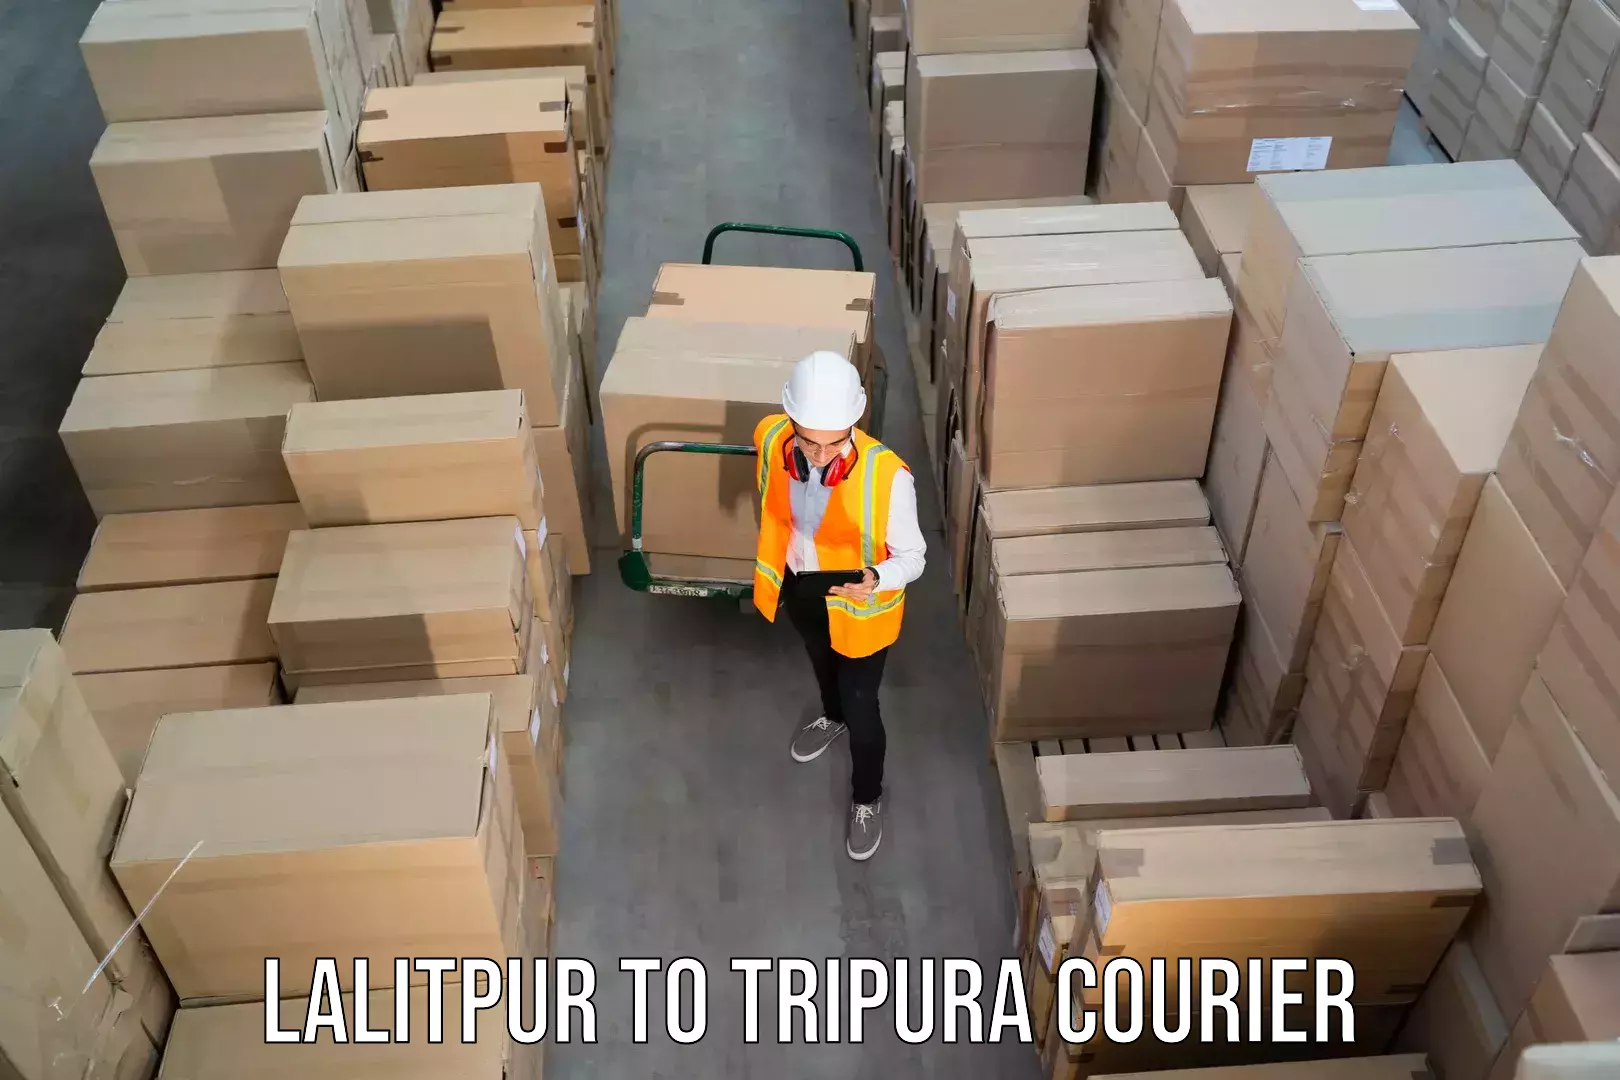 Seamless shipping experience Lalitpur to Udaipur Tripura